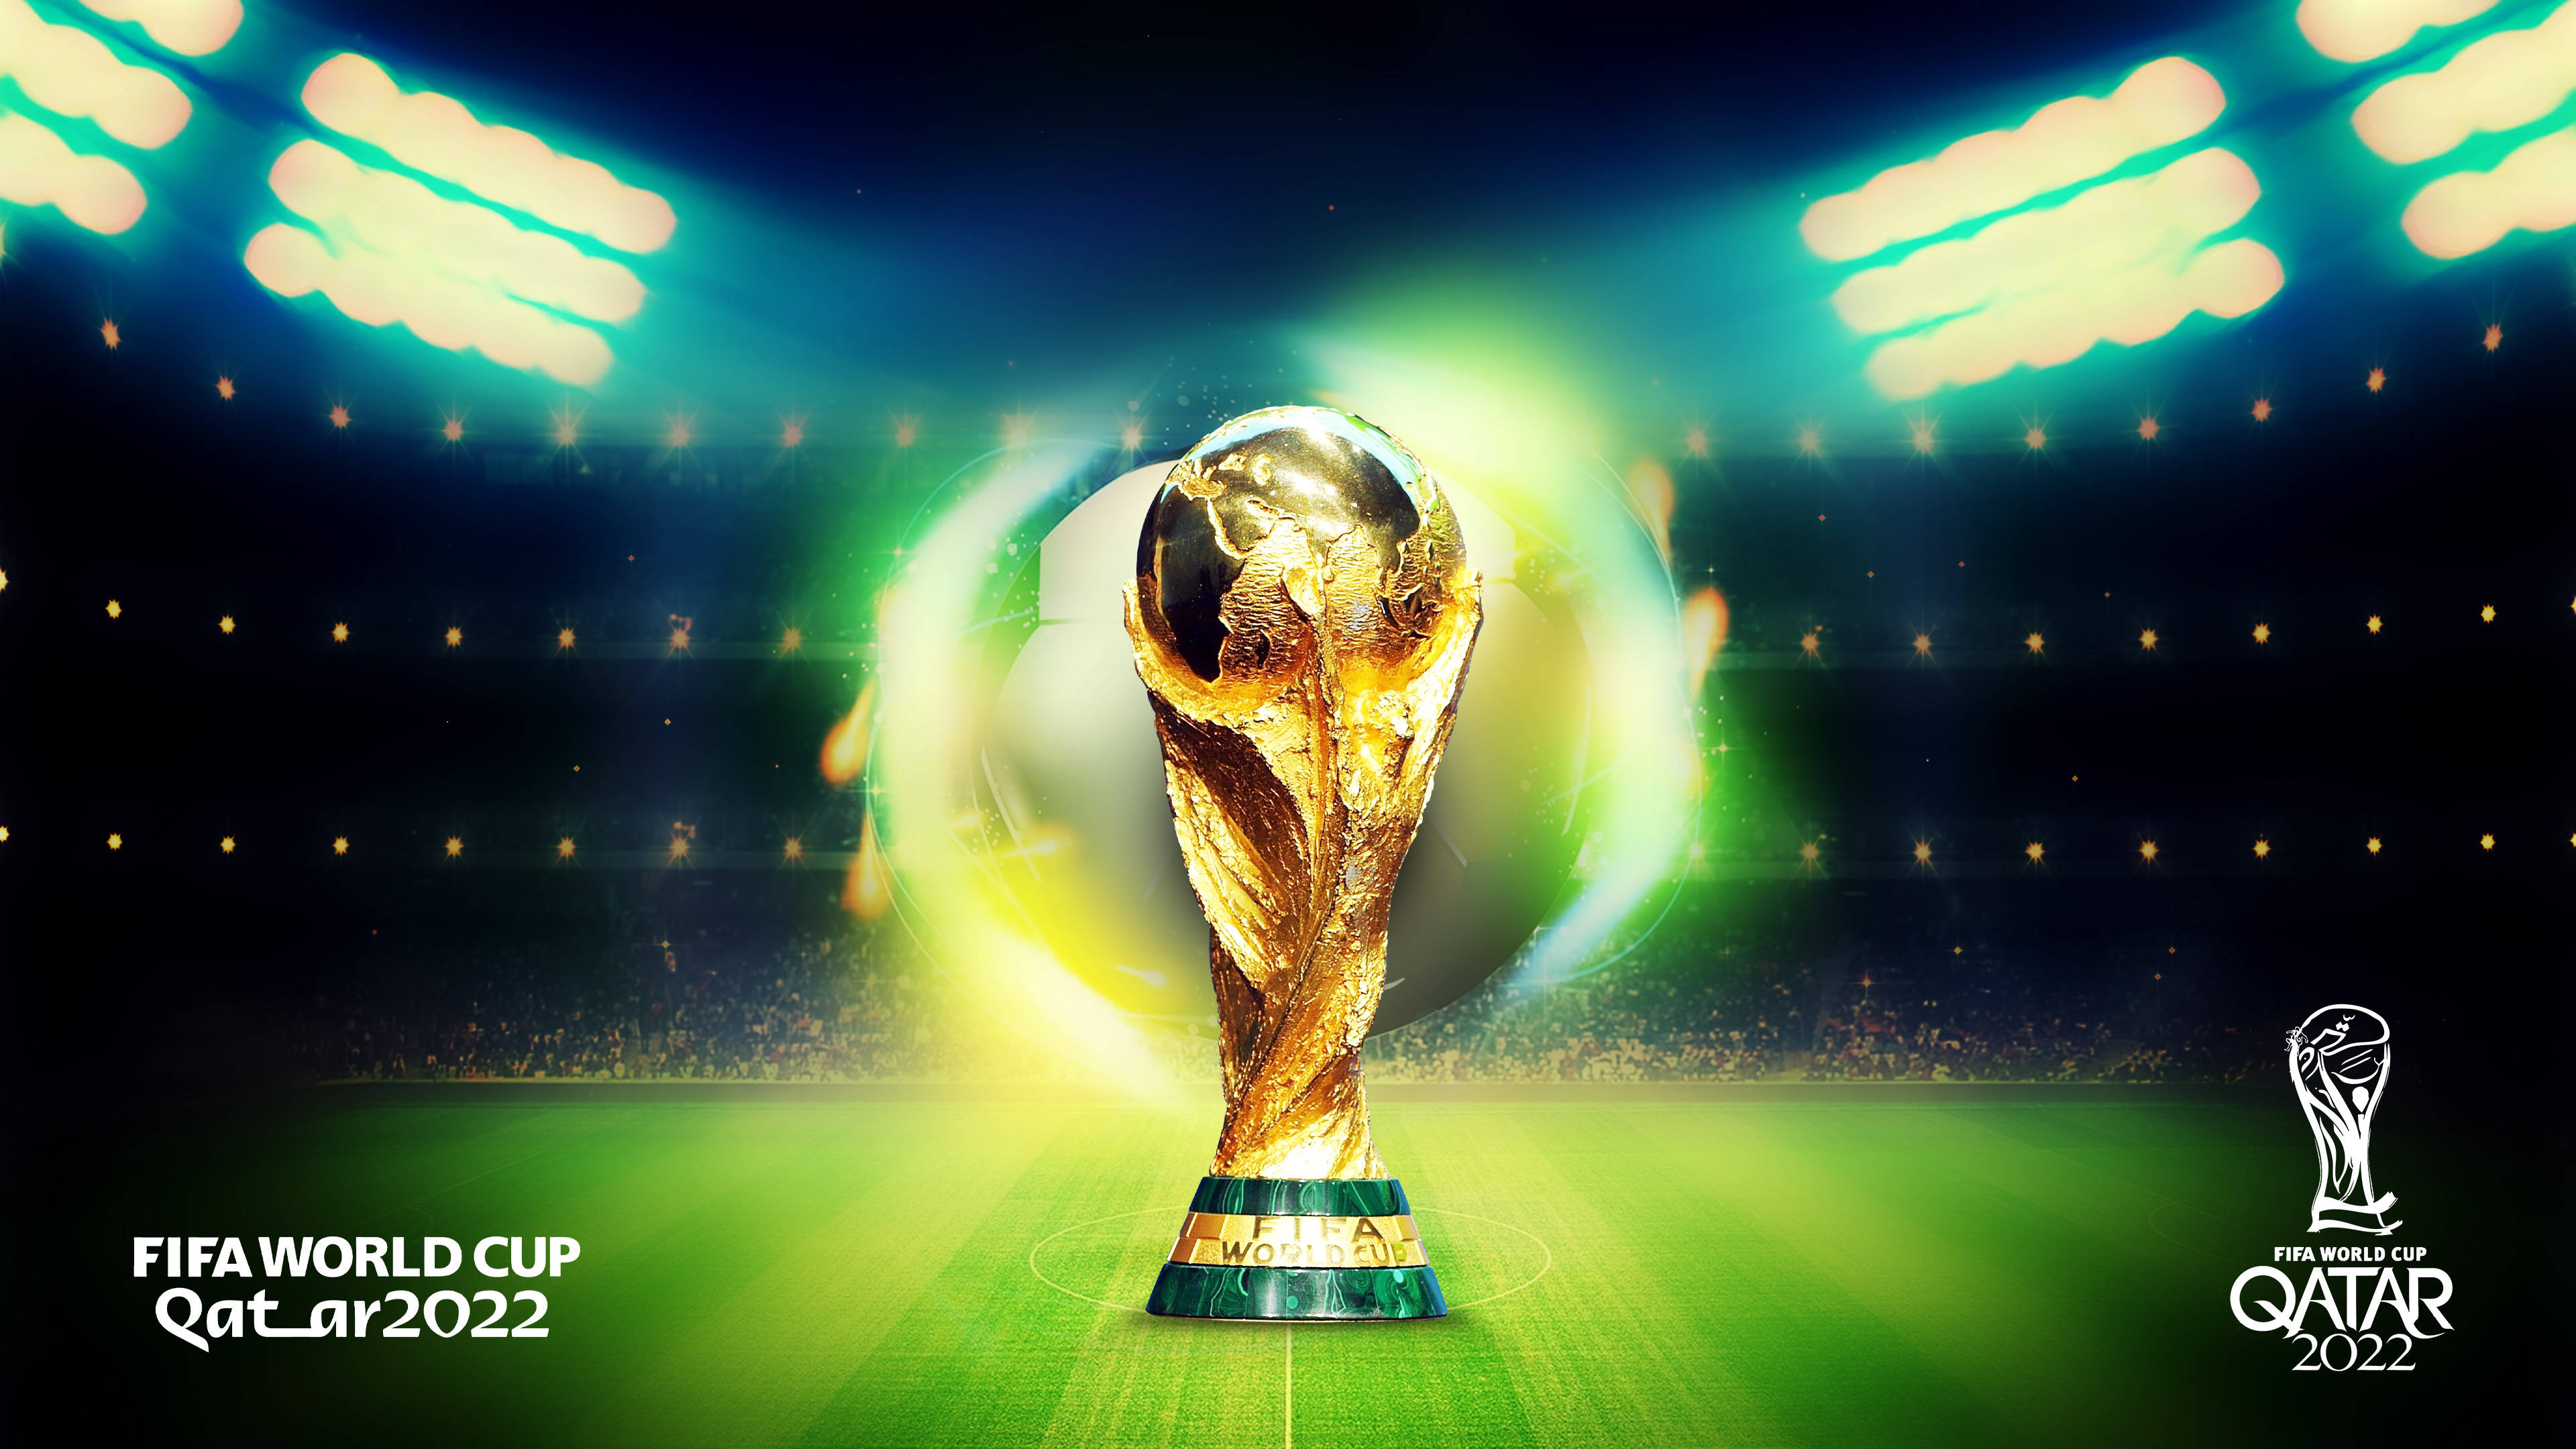 FIFA World Cup Trophy 2022 Qatar Wallpapers  Top 15 Best FIFA World Cup  Trophy 2022 Qatar Wallpapers Download